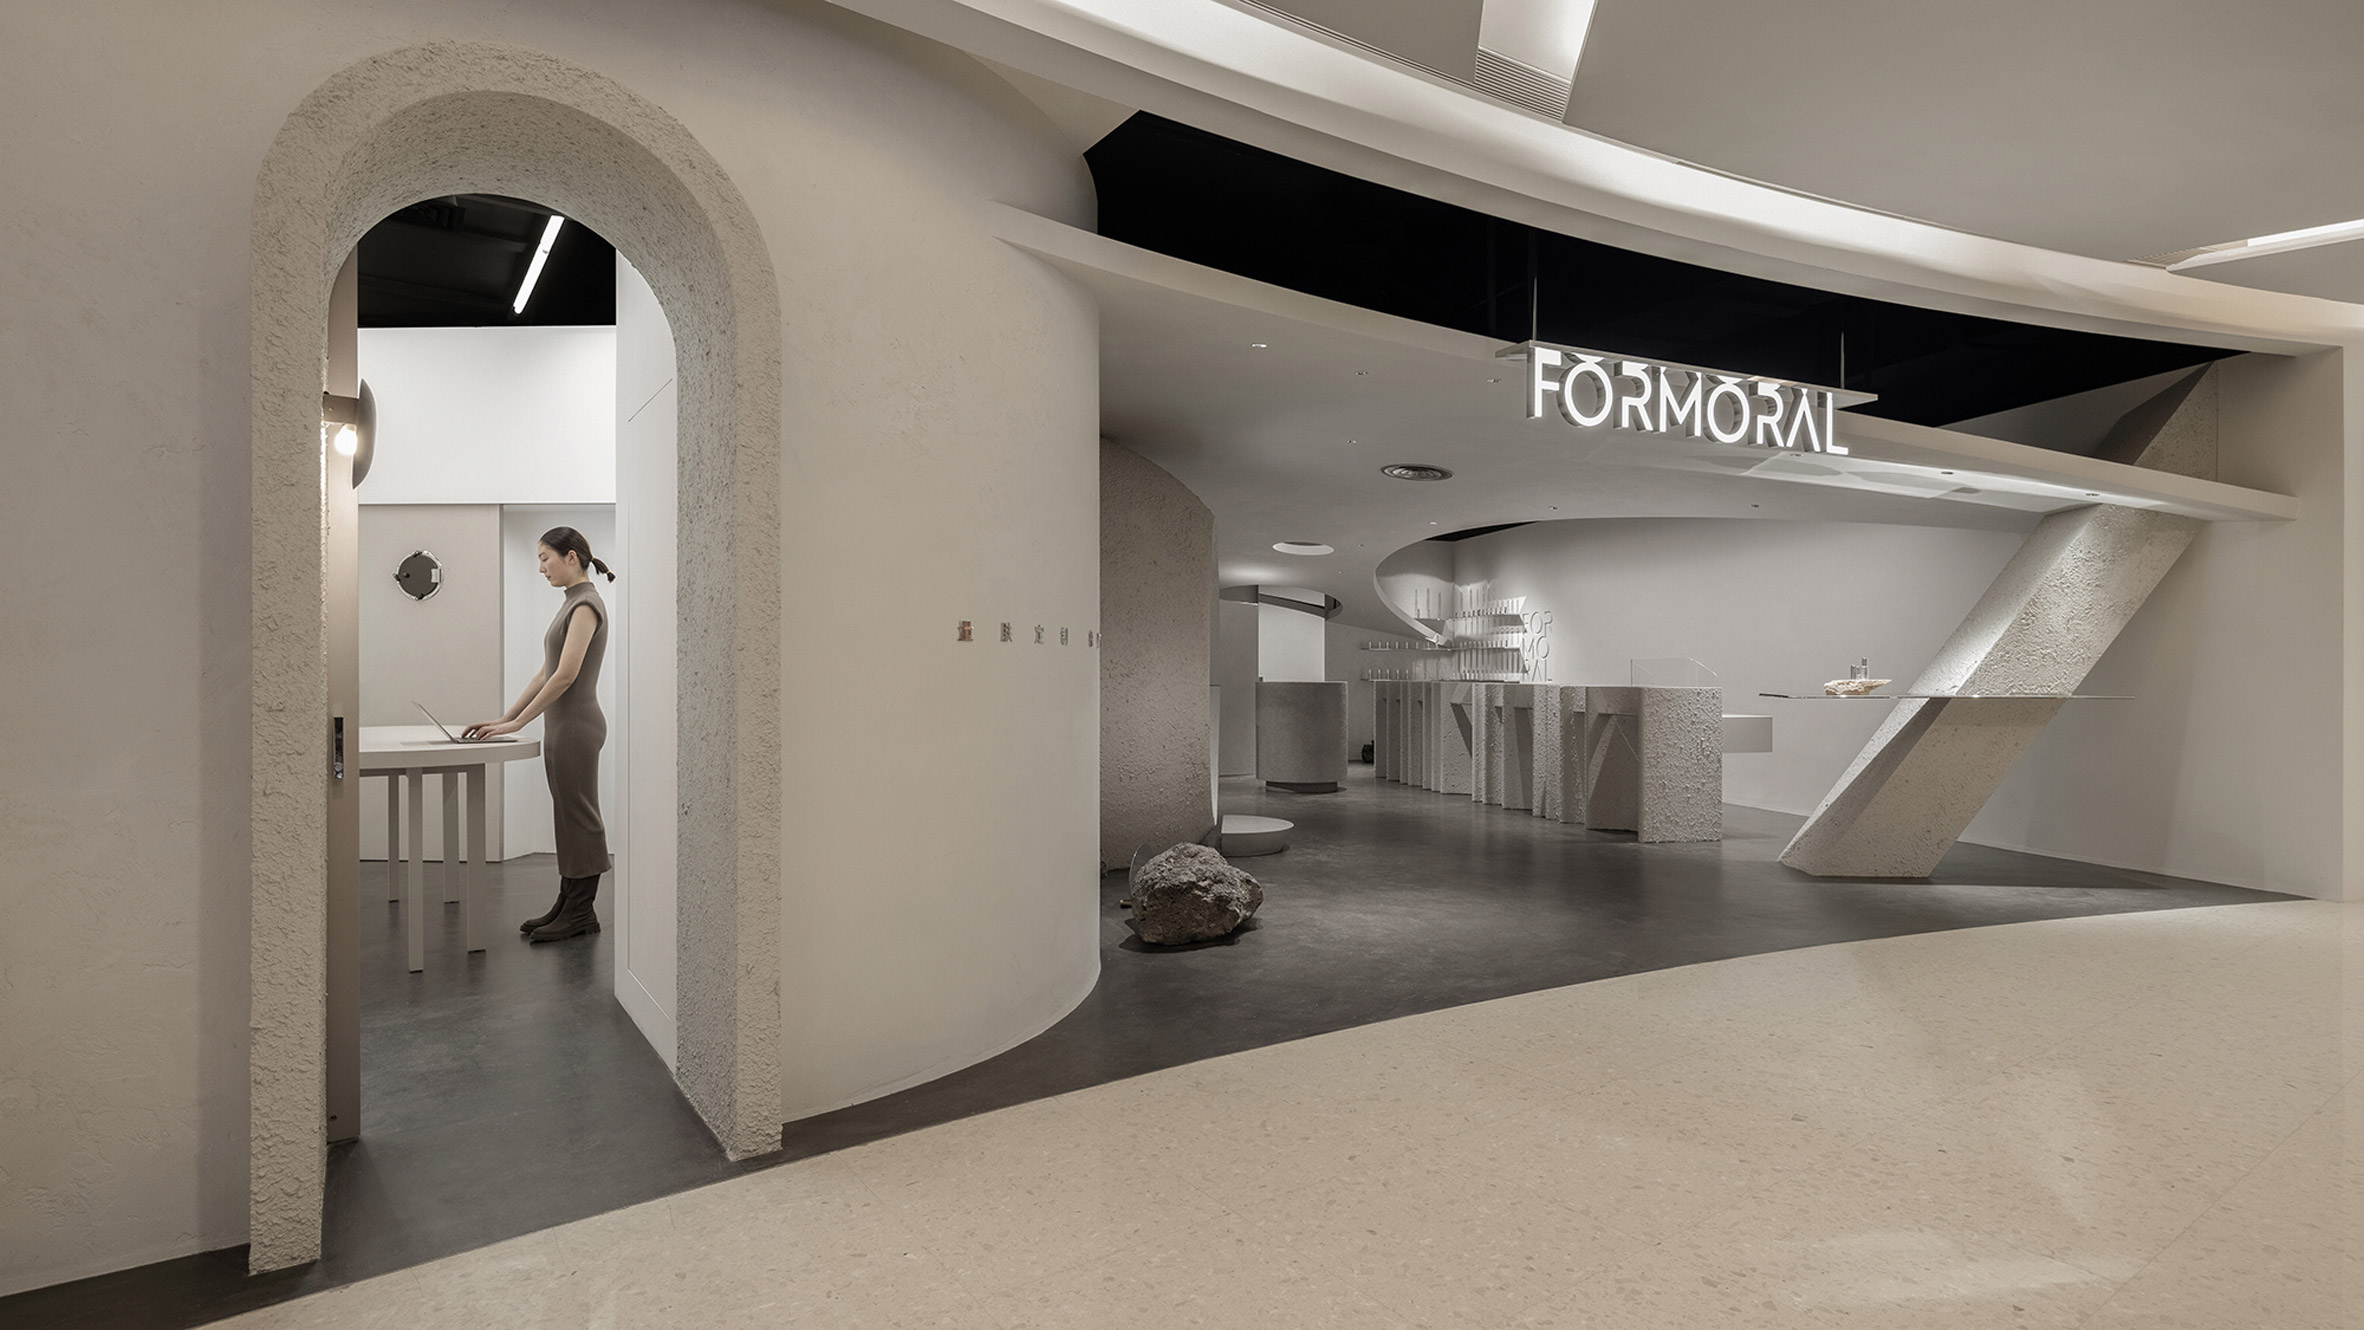 Formoral is a skincare store in China